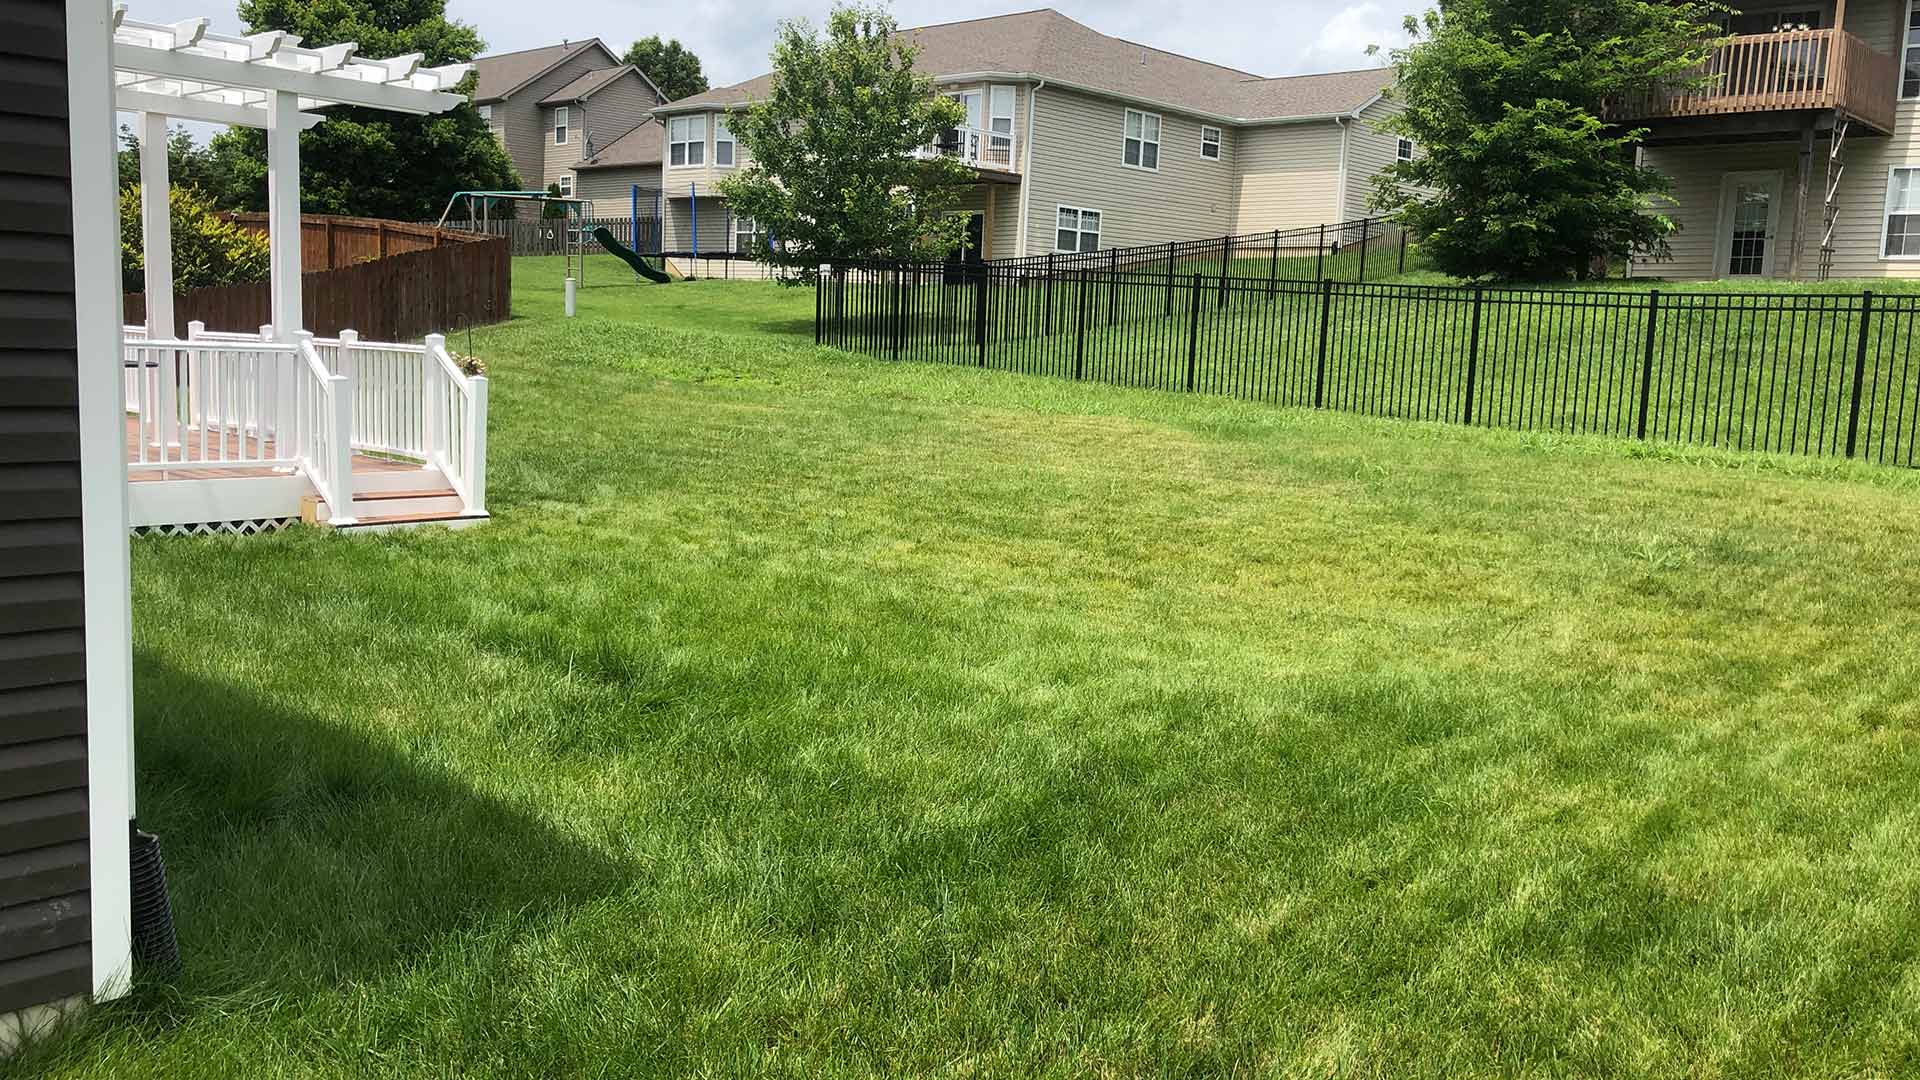 A freshly mowed lawn behind a home in Holiday Shores, IL.